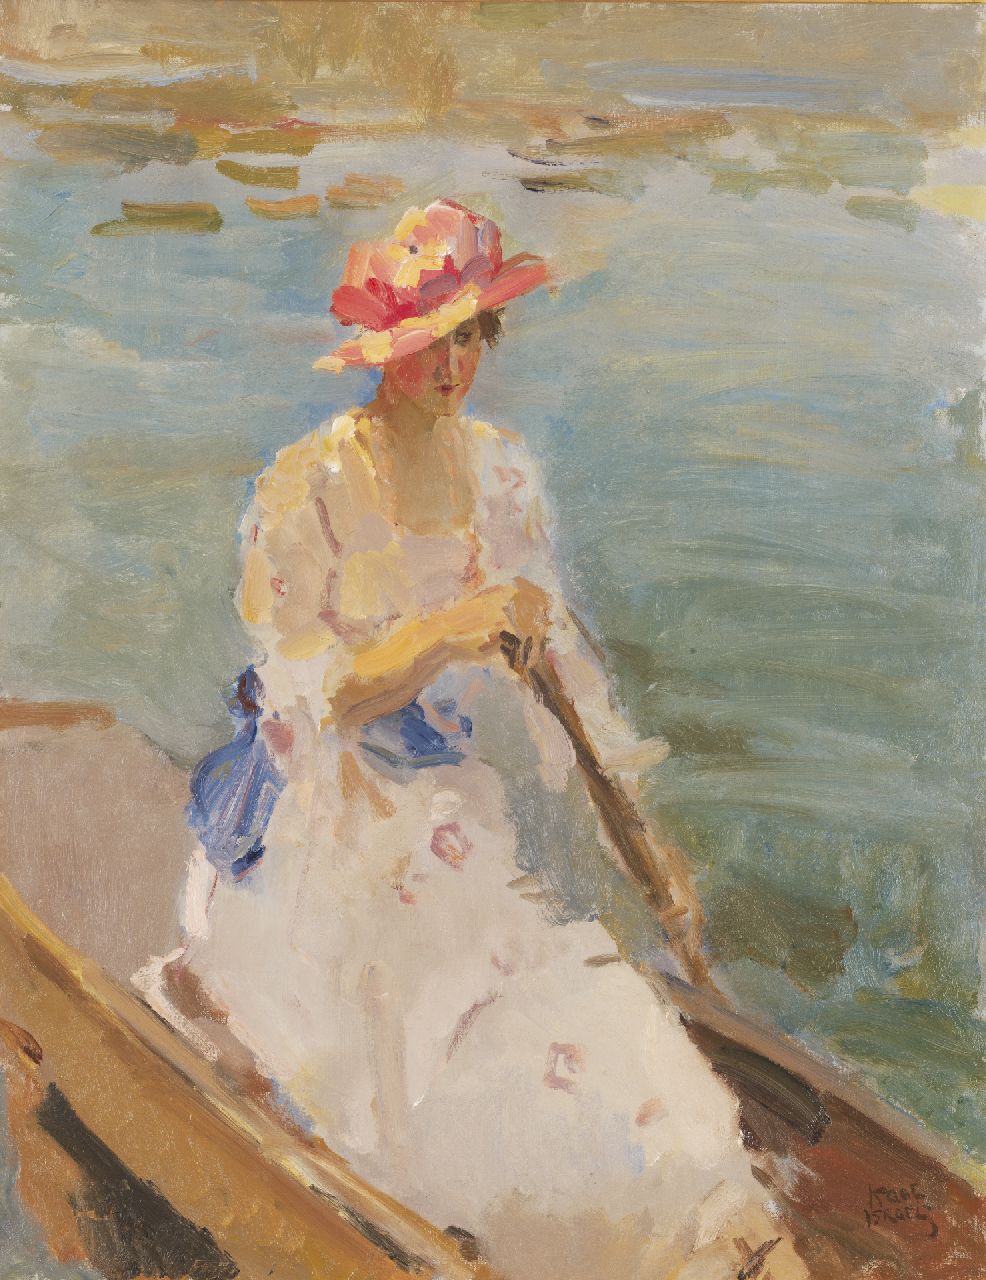 Israels I.L.  | 'Isaac' Lazarus Israels, A young woman, rowing on the Thames, oil on canvas 92.0 x 71.5 cm, signed l.r. and painted between 1913-1914